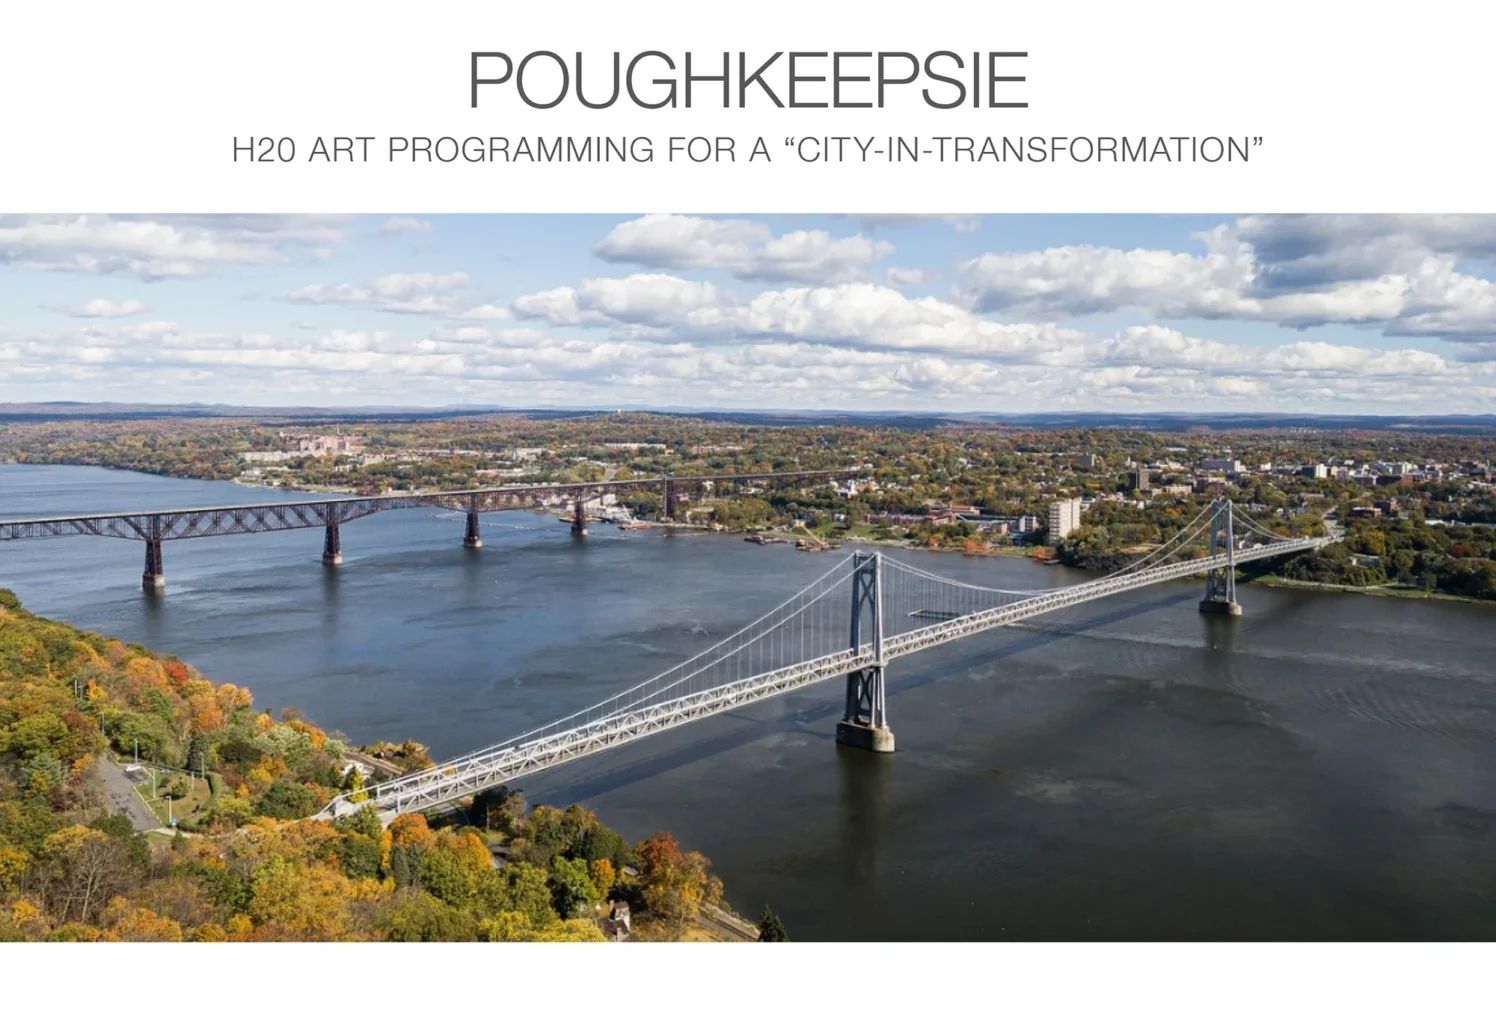 Title page for Poughkeepsie H20 project